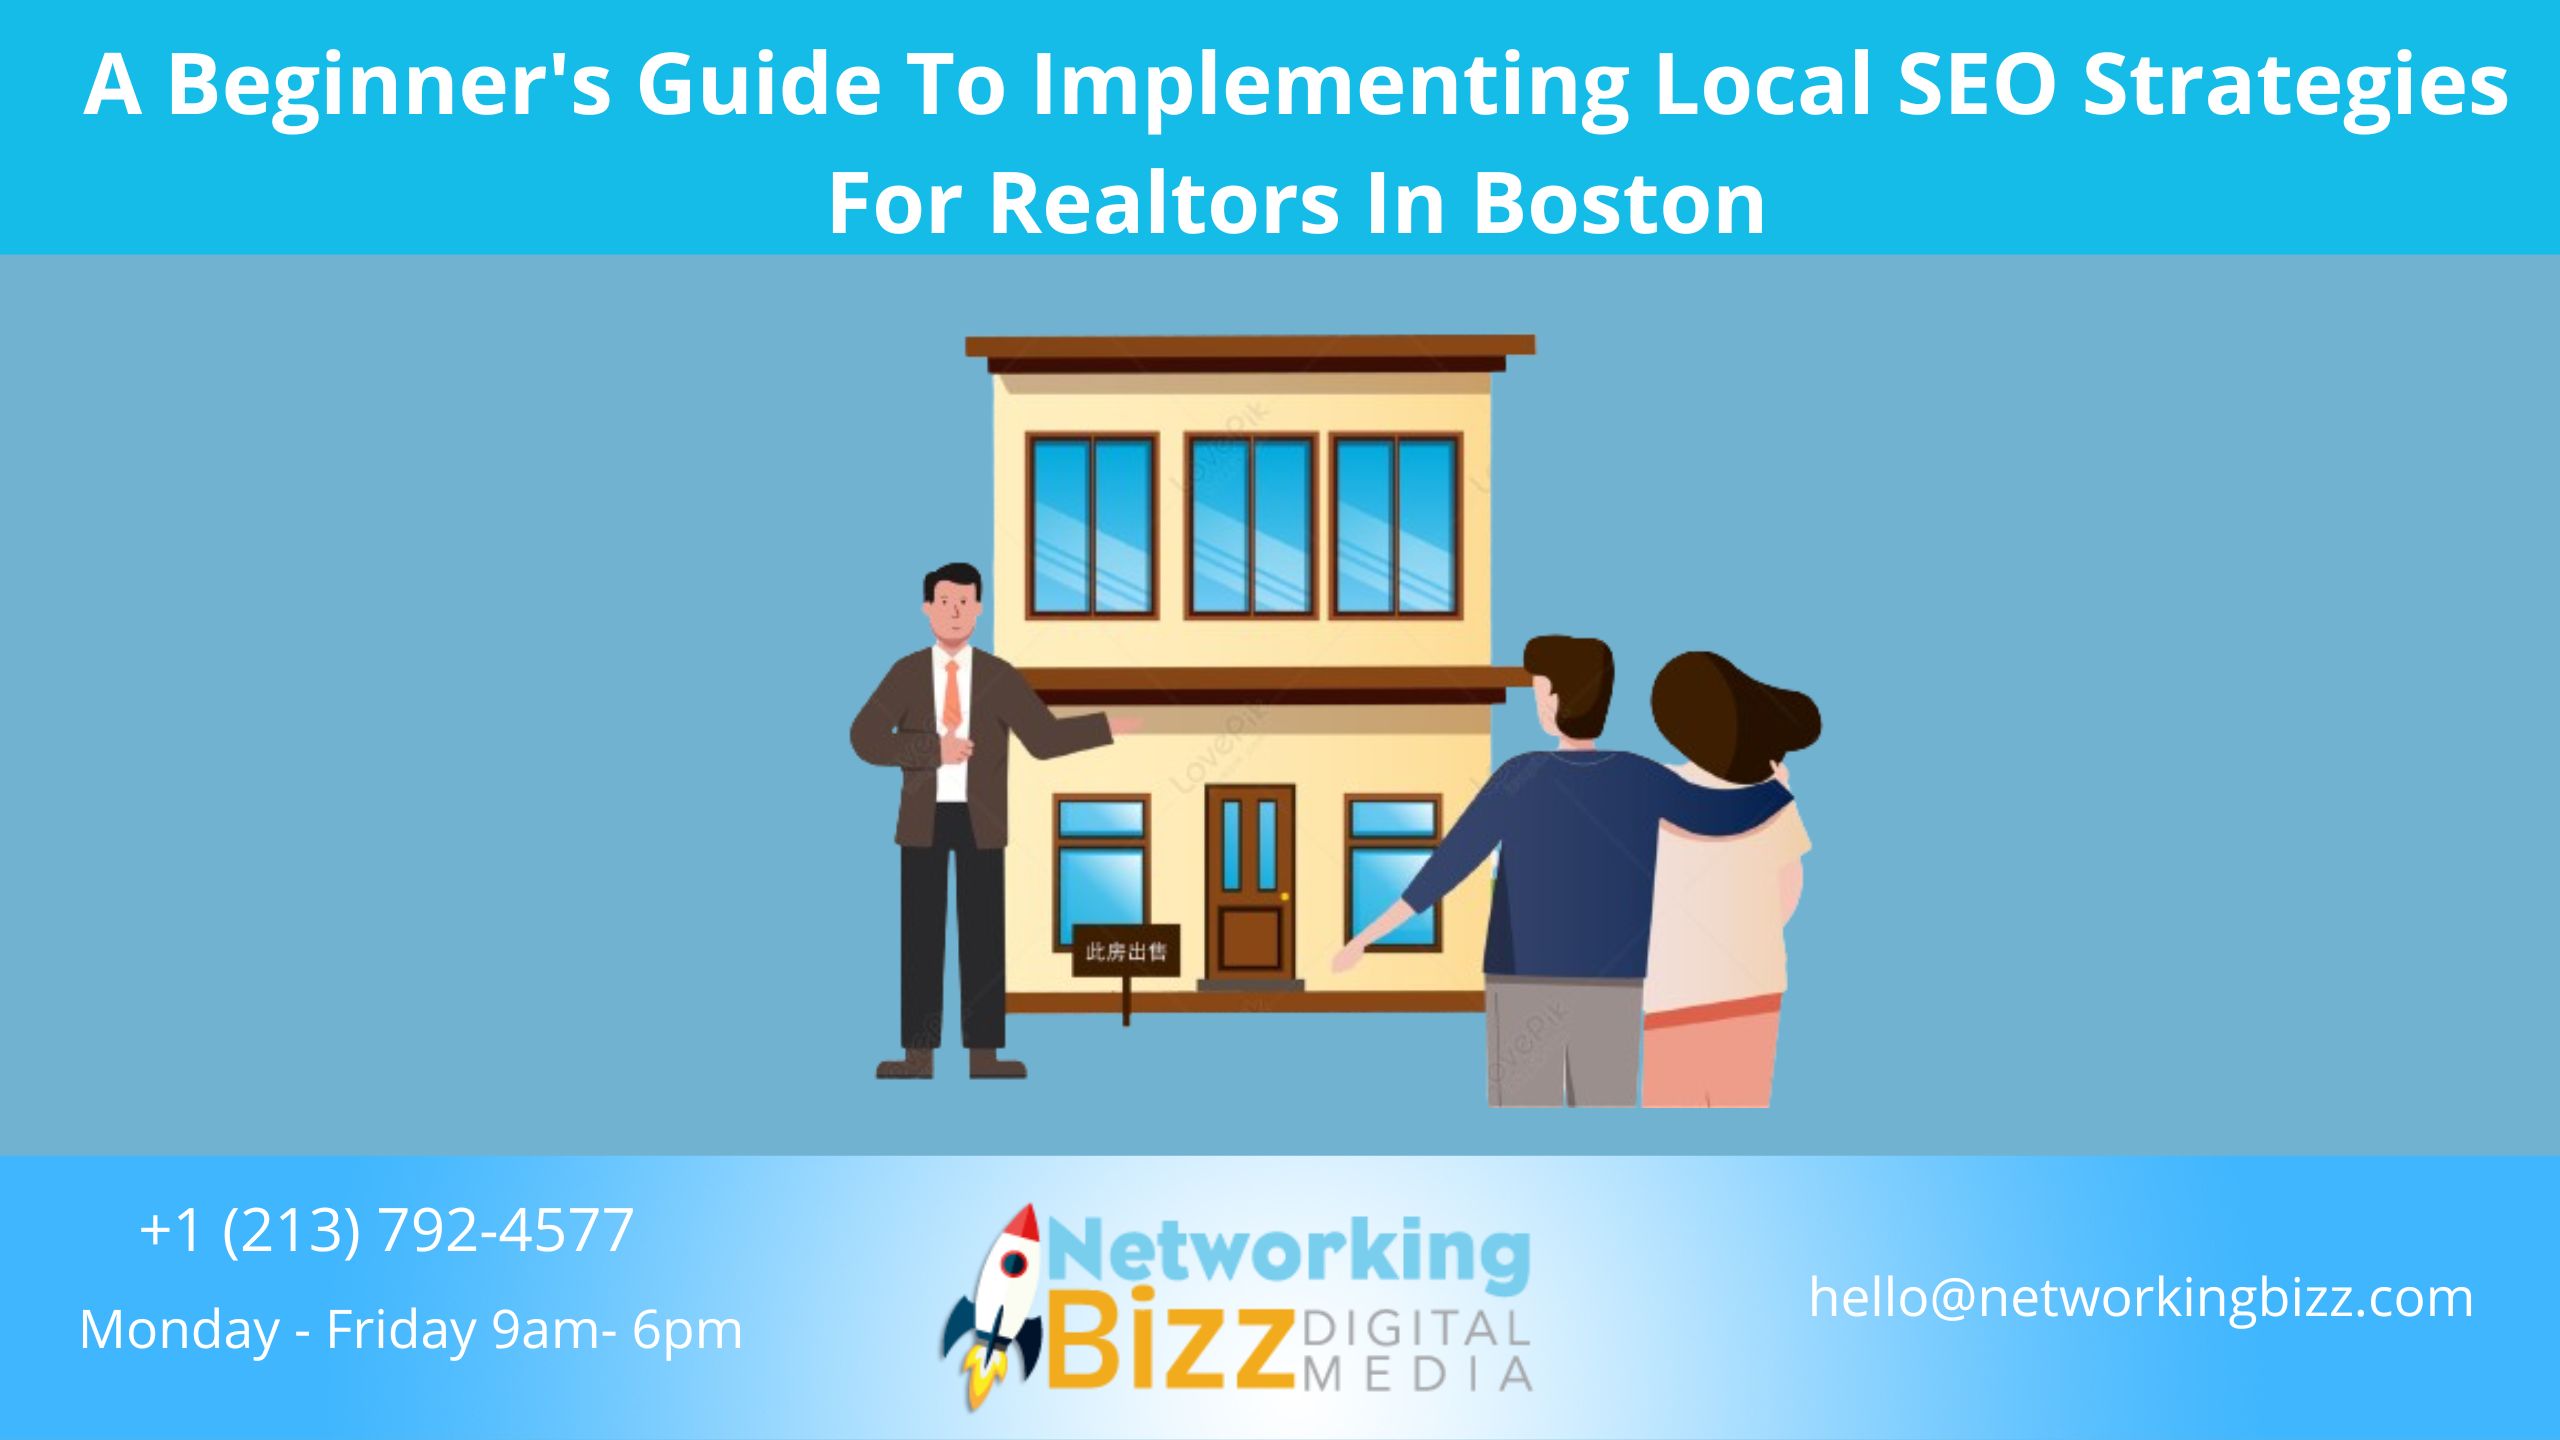 A Beginner’s Guide To Implementing Local SEO Strategies For Realtors In Boston